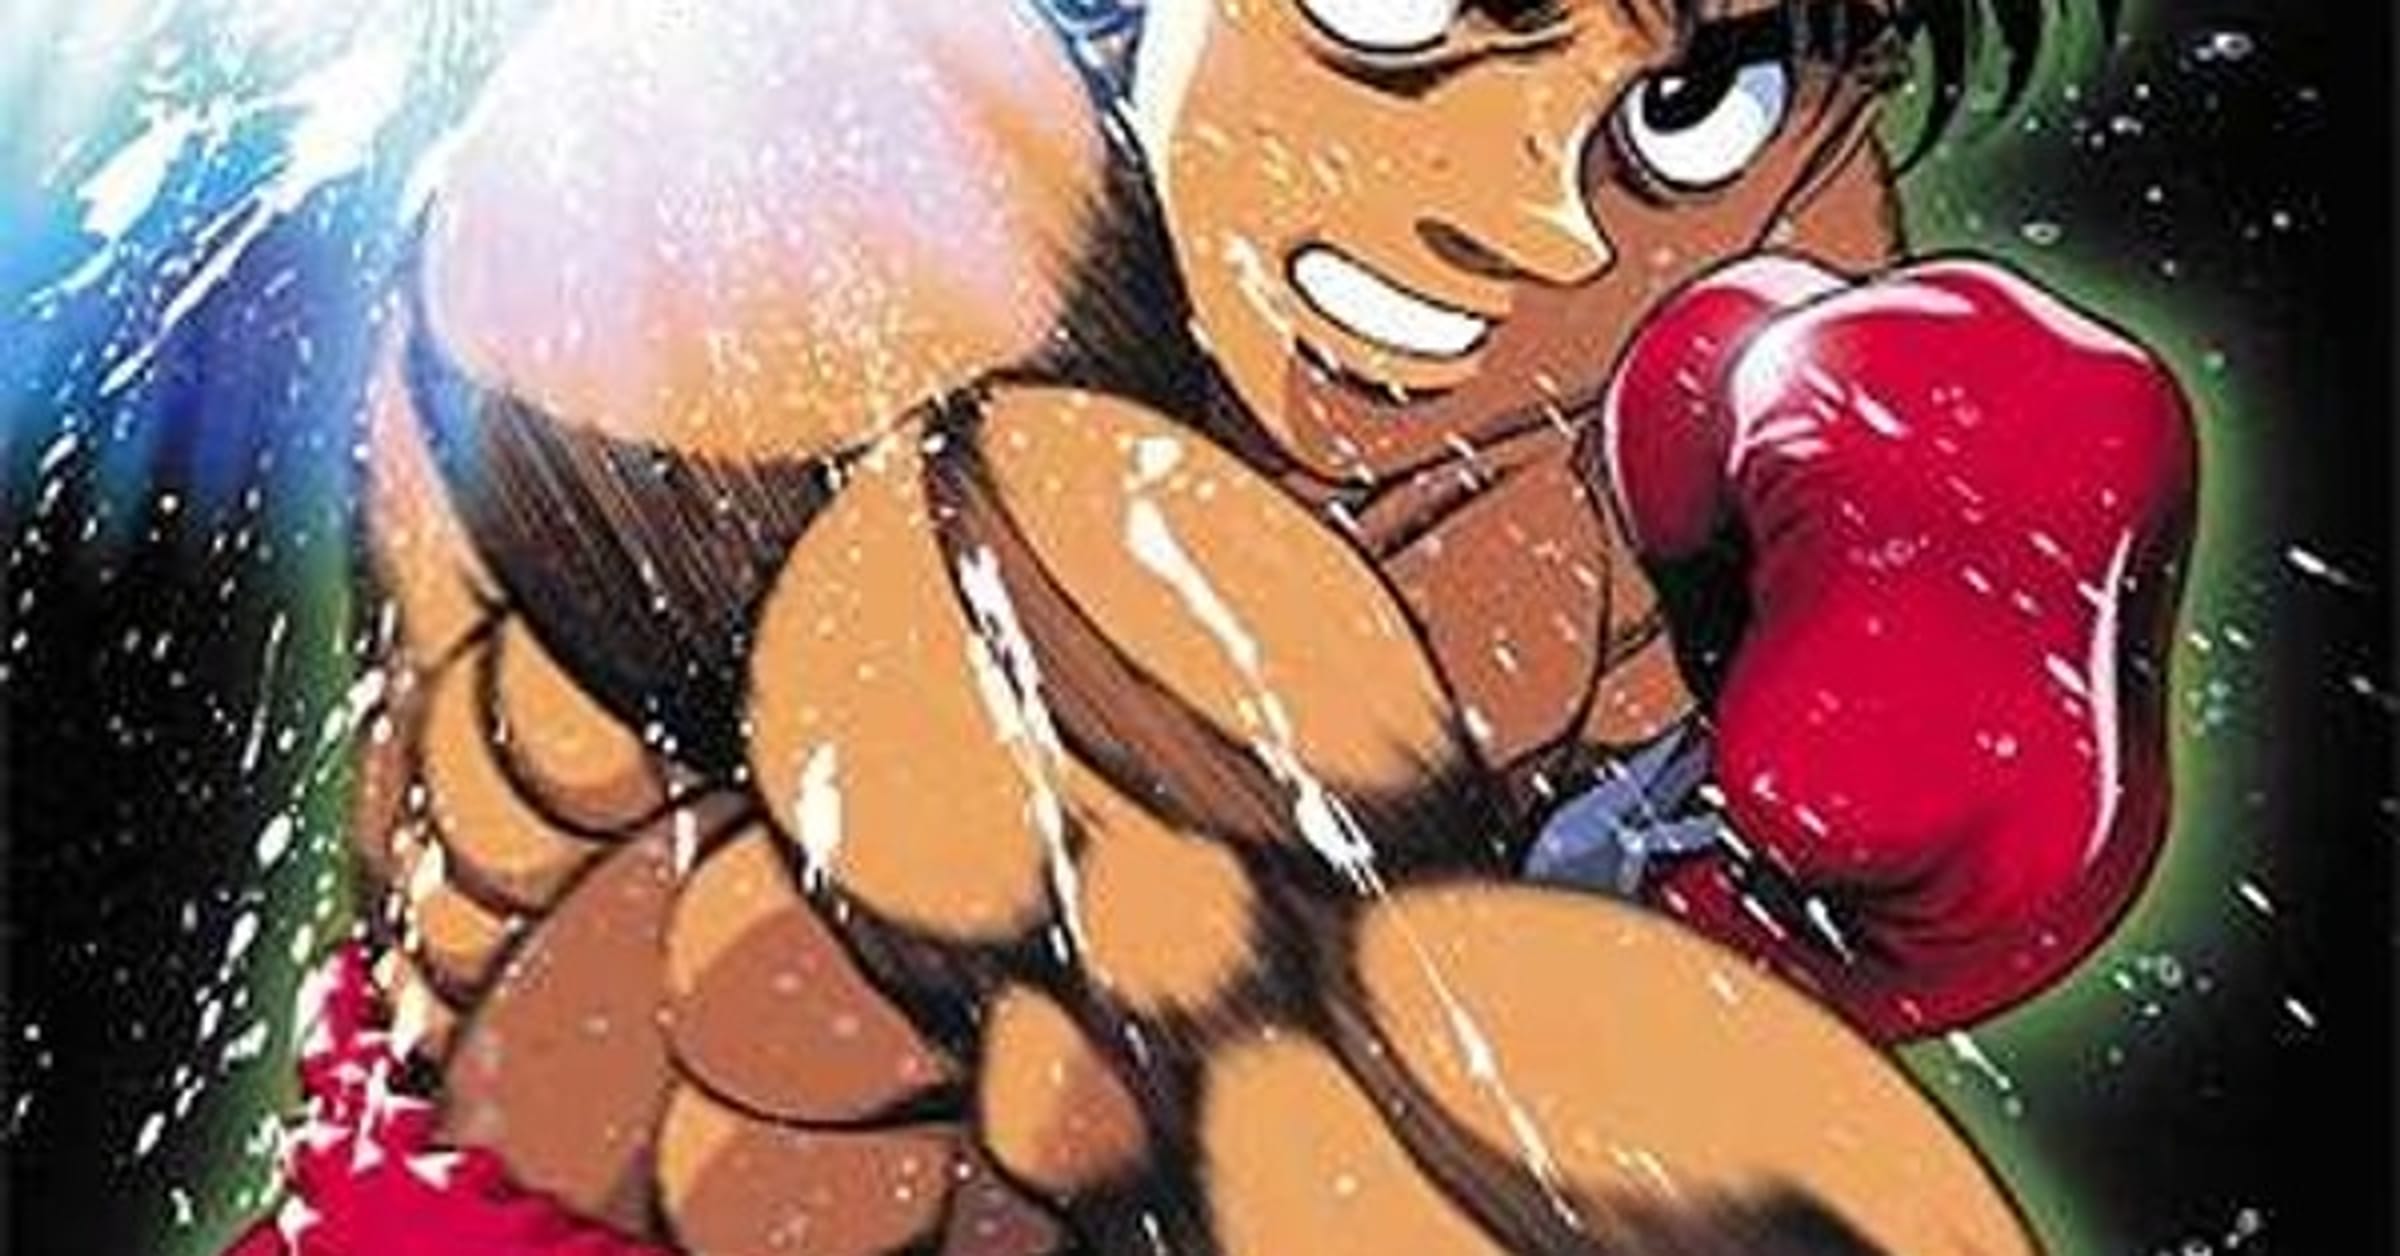 Best Anime About Boxing - IMDb